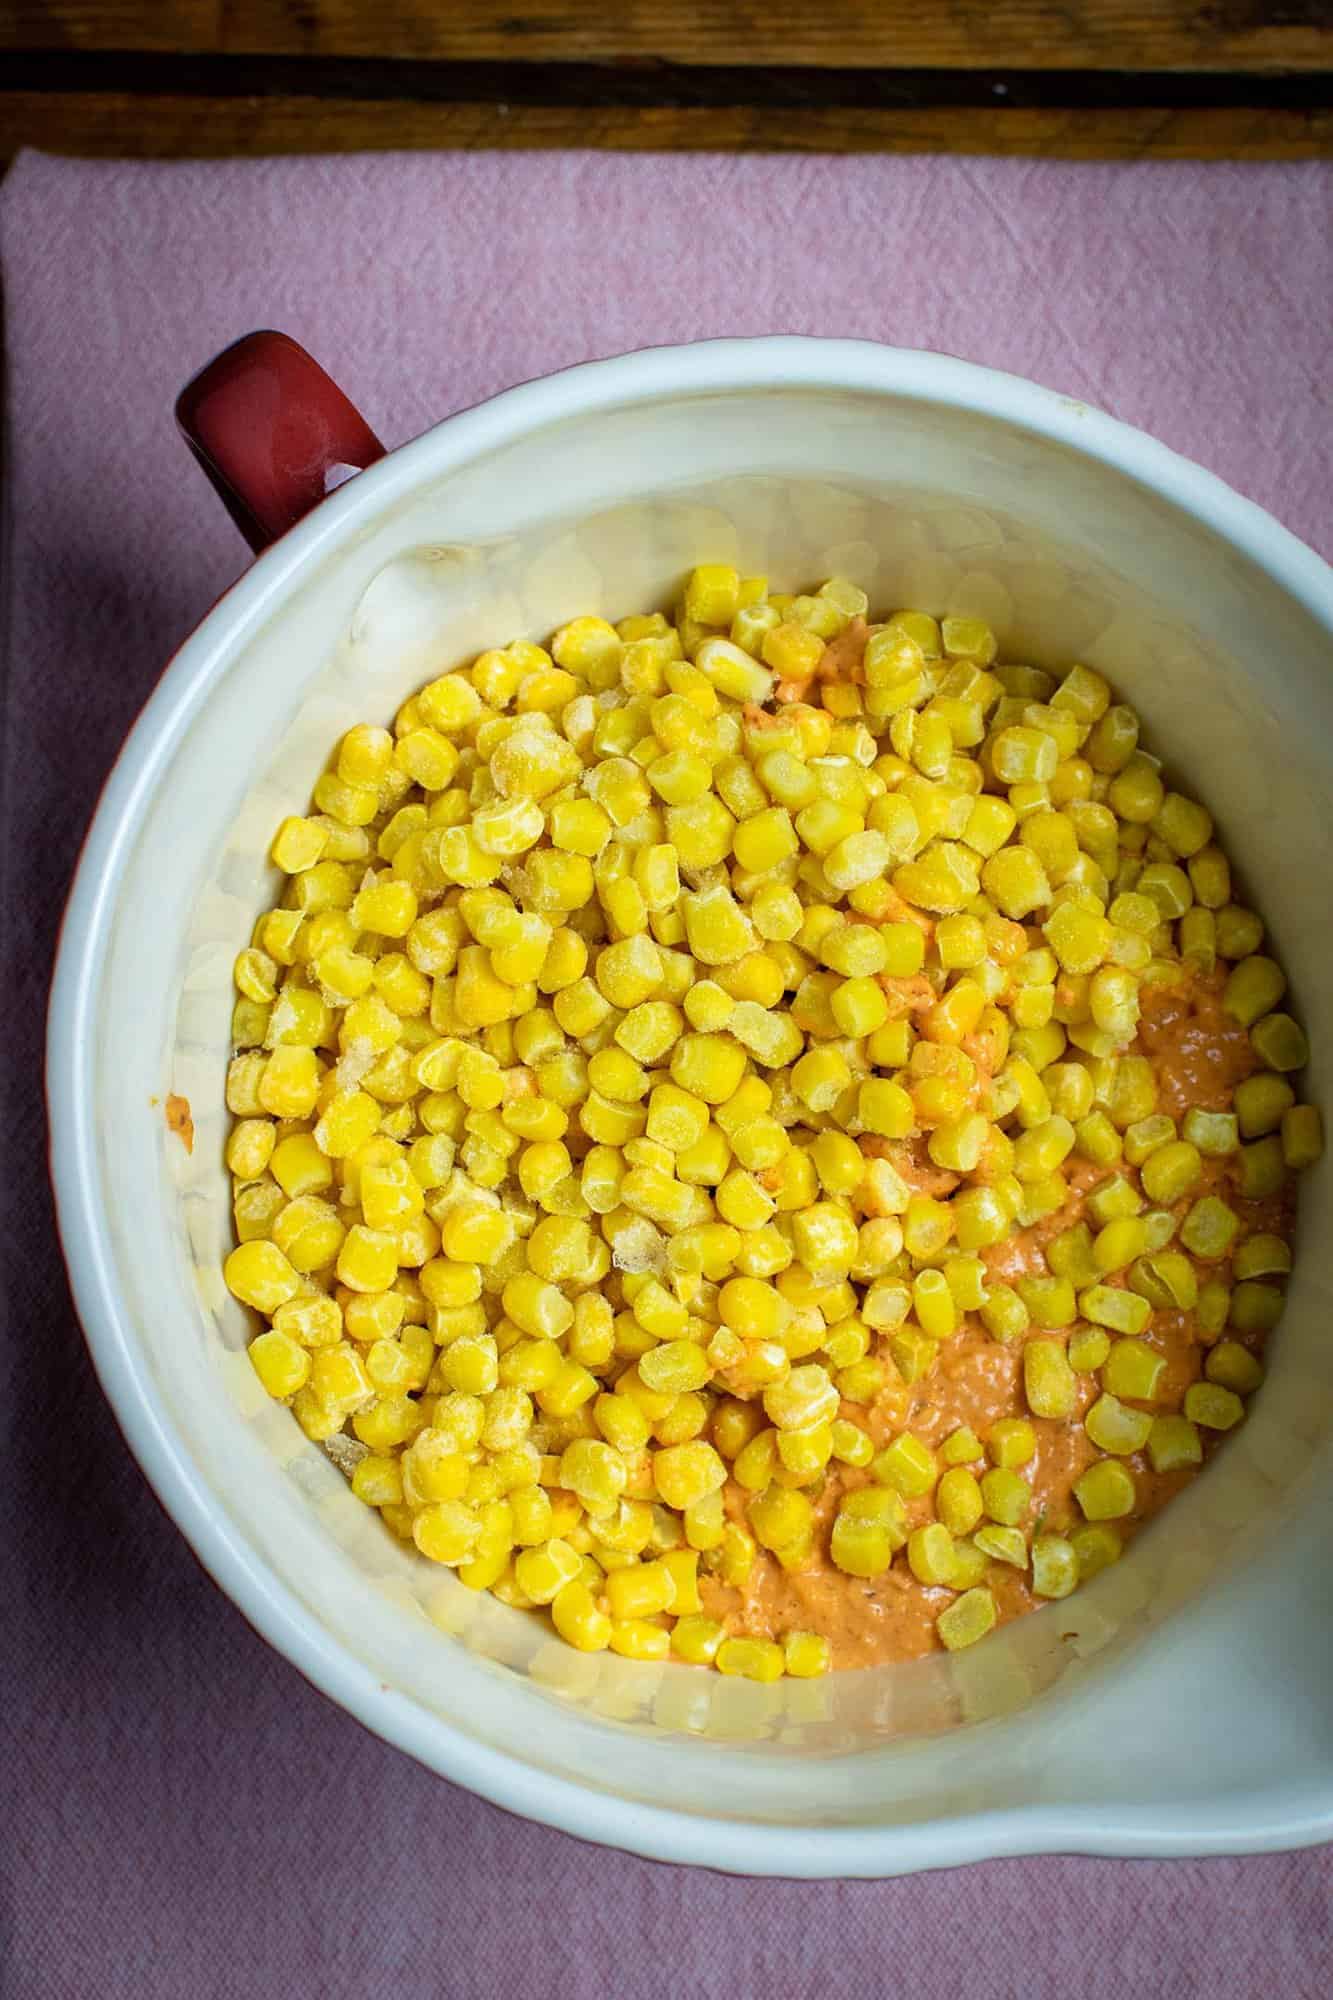 A mixing bowl full of sweetcorn and red batter mixture, ready to be mixed. Sat on a pink tea towel.